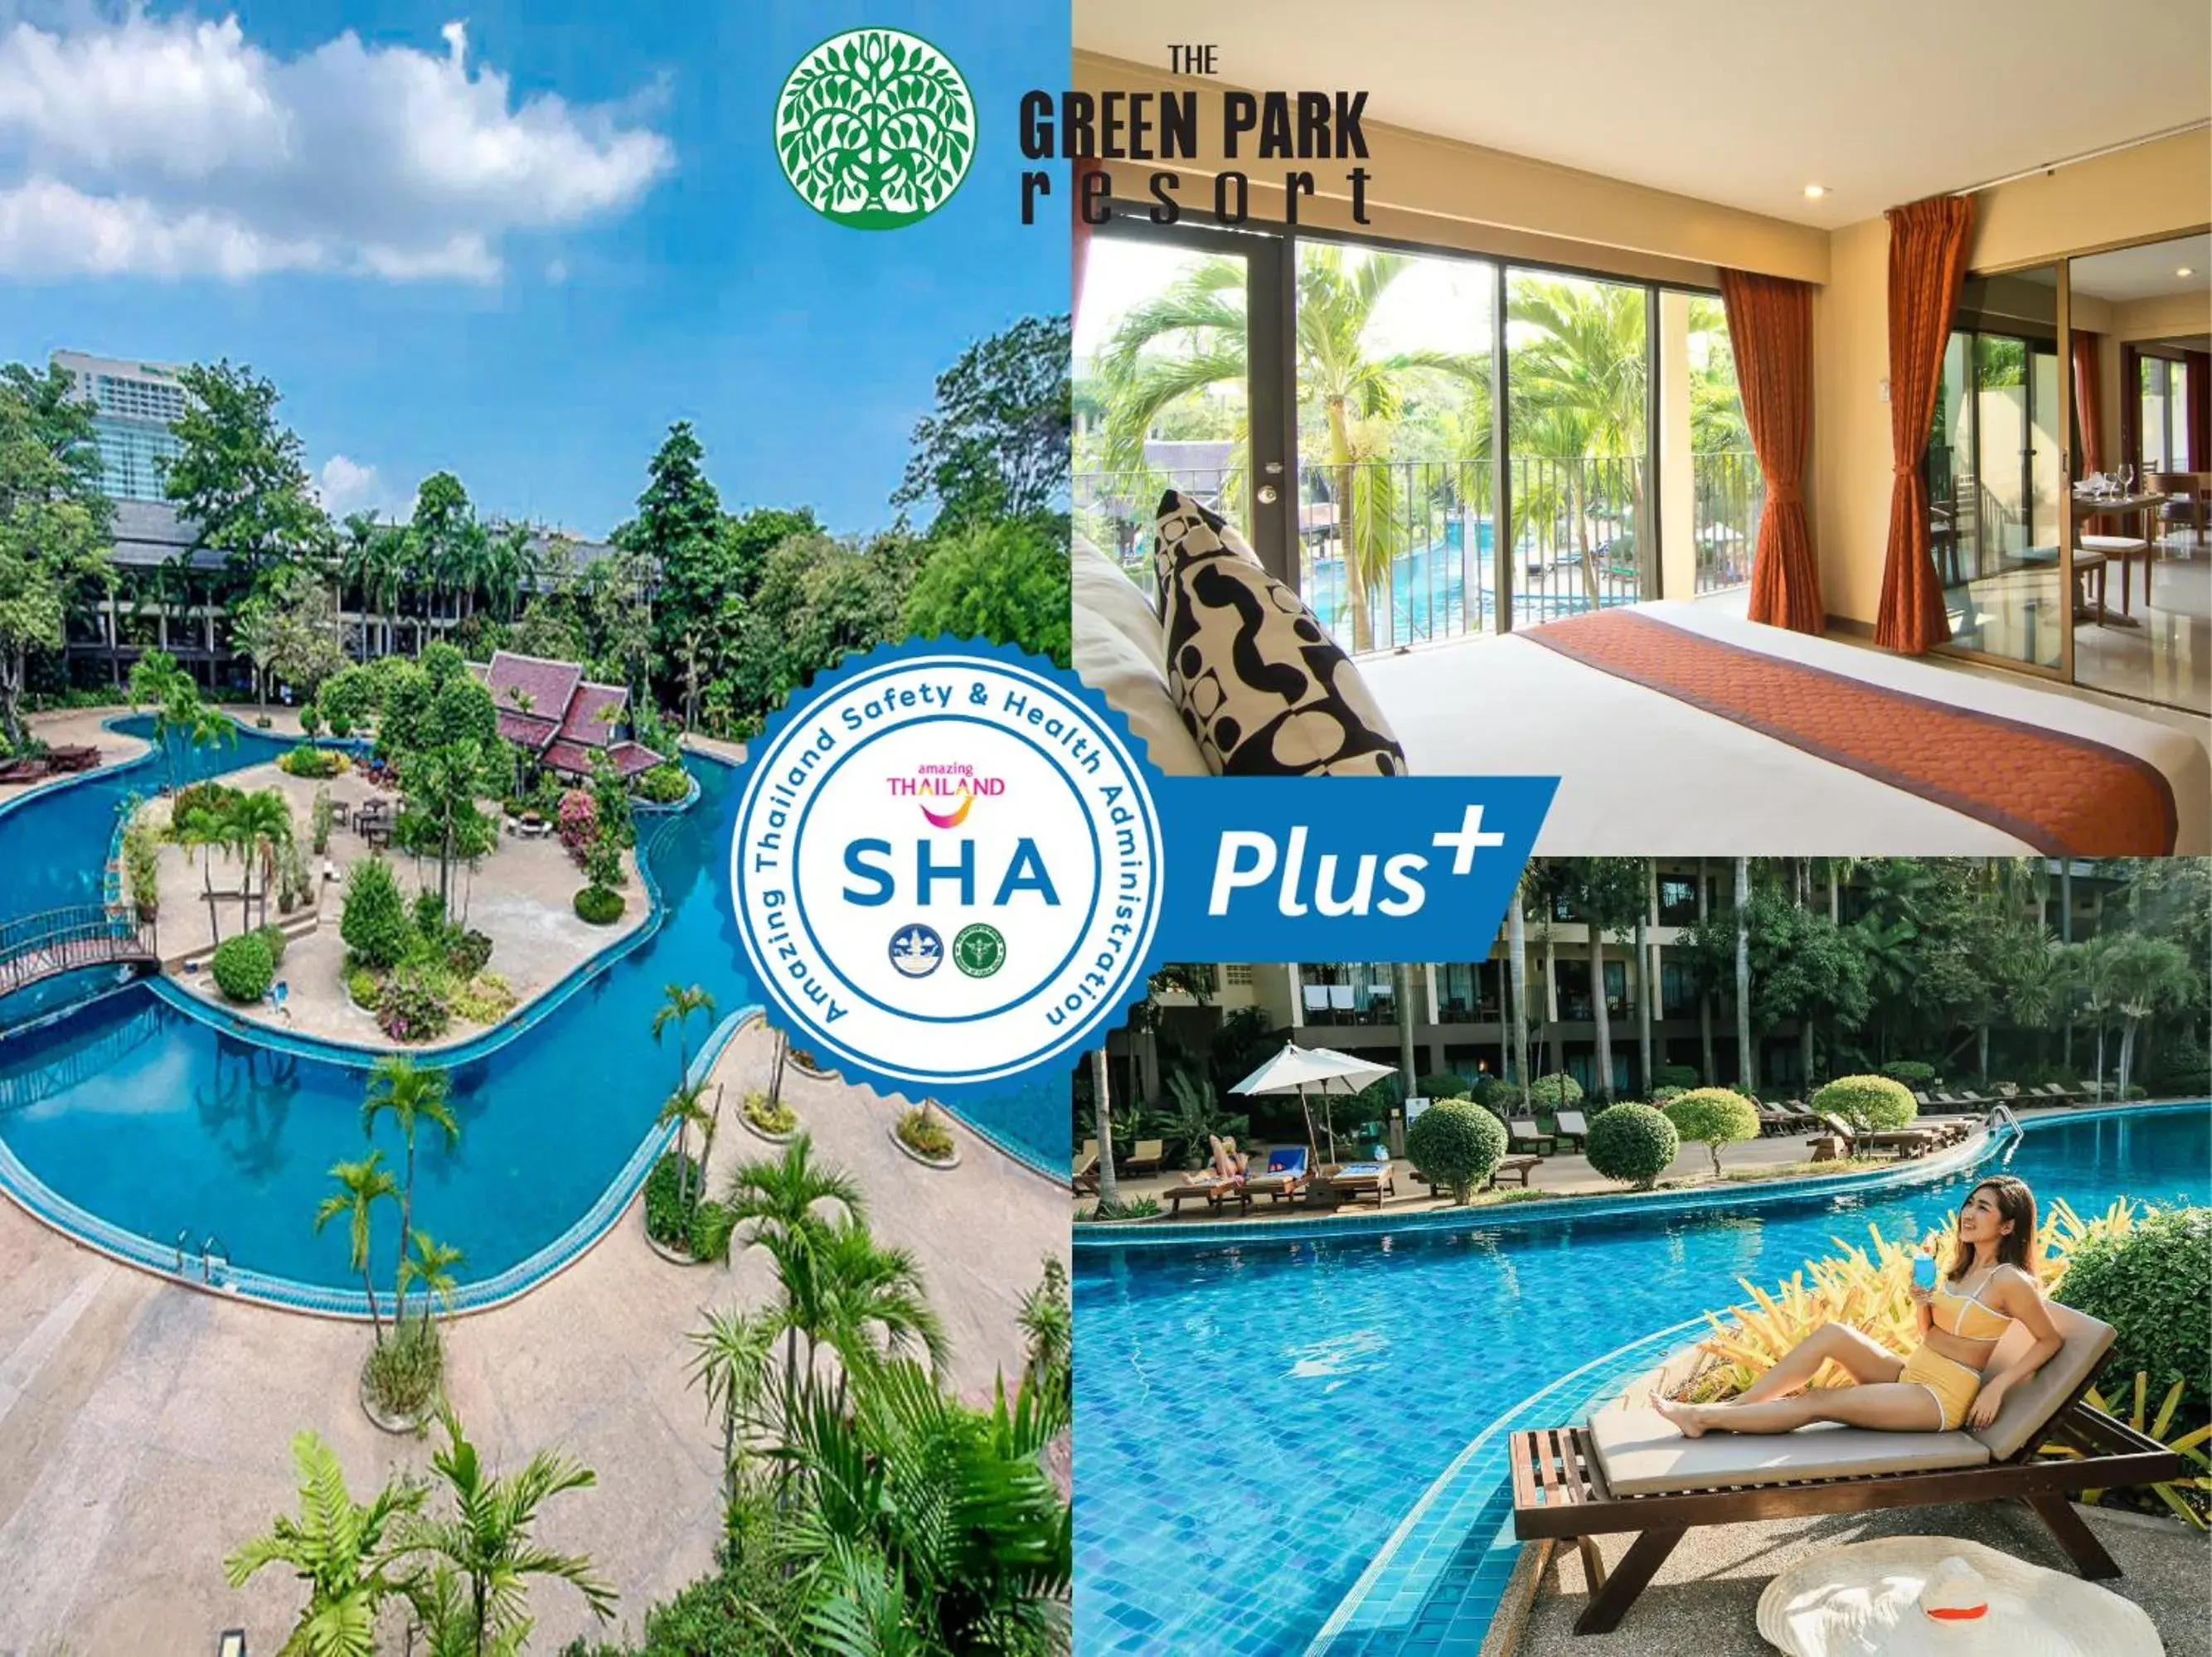 Pool view in The Green Park Resort - SHA Extra Plus